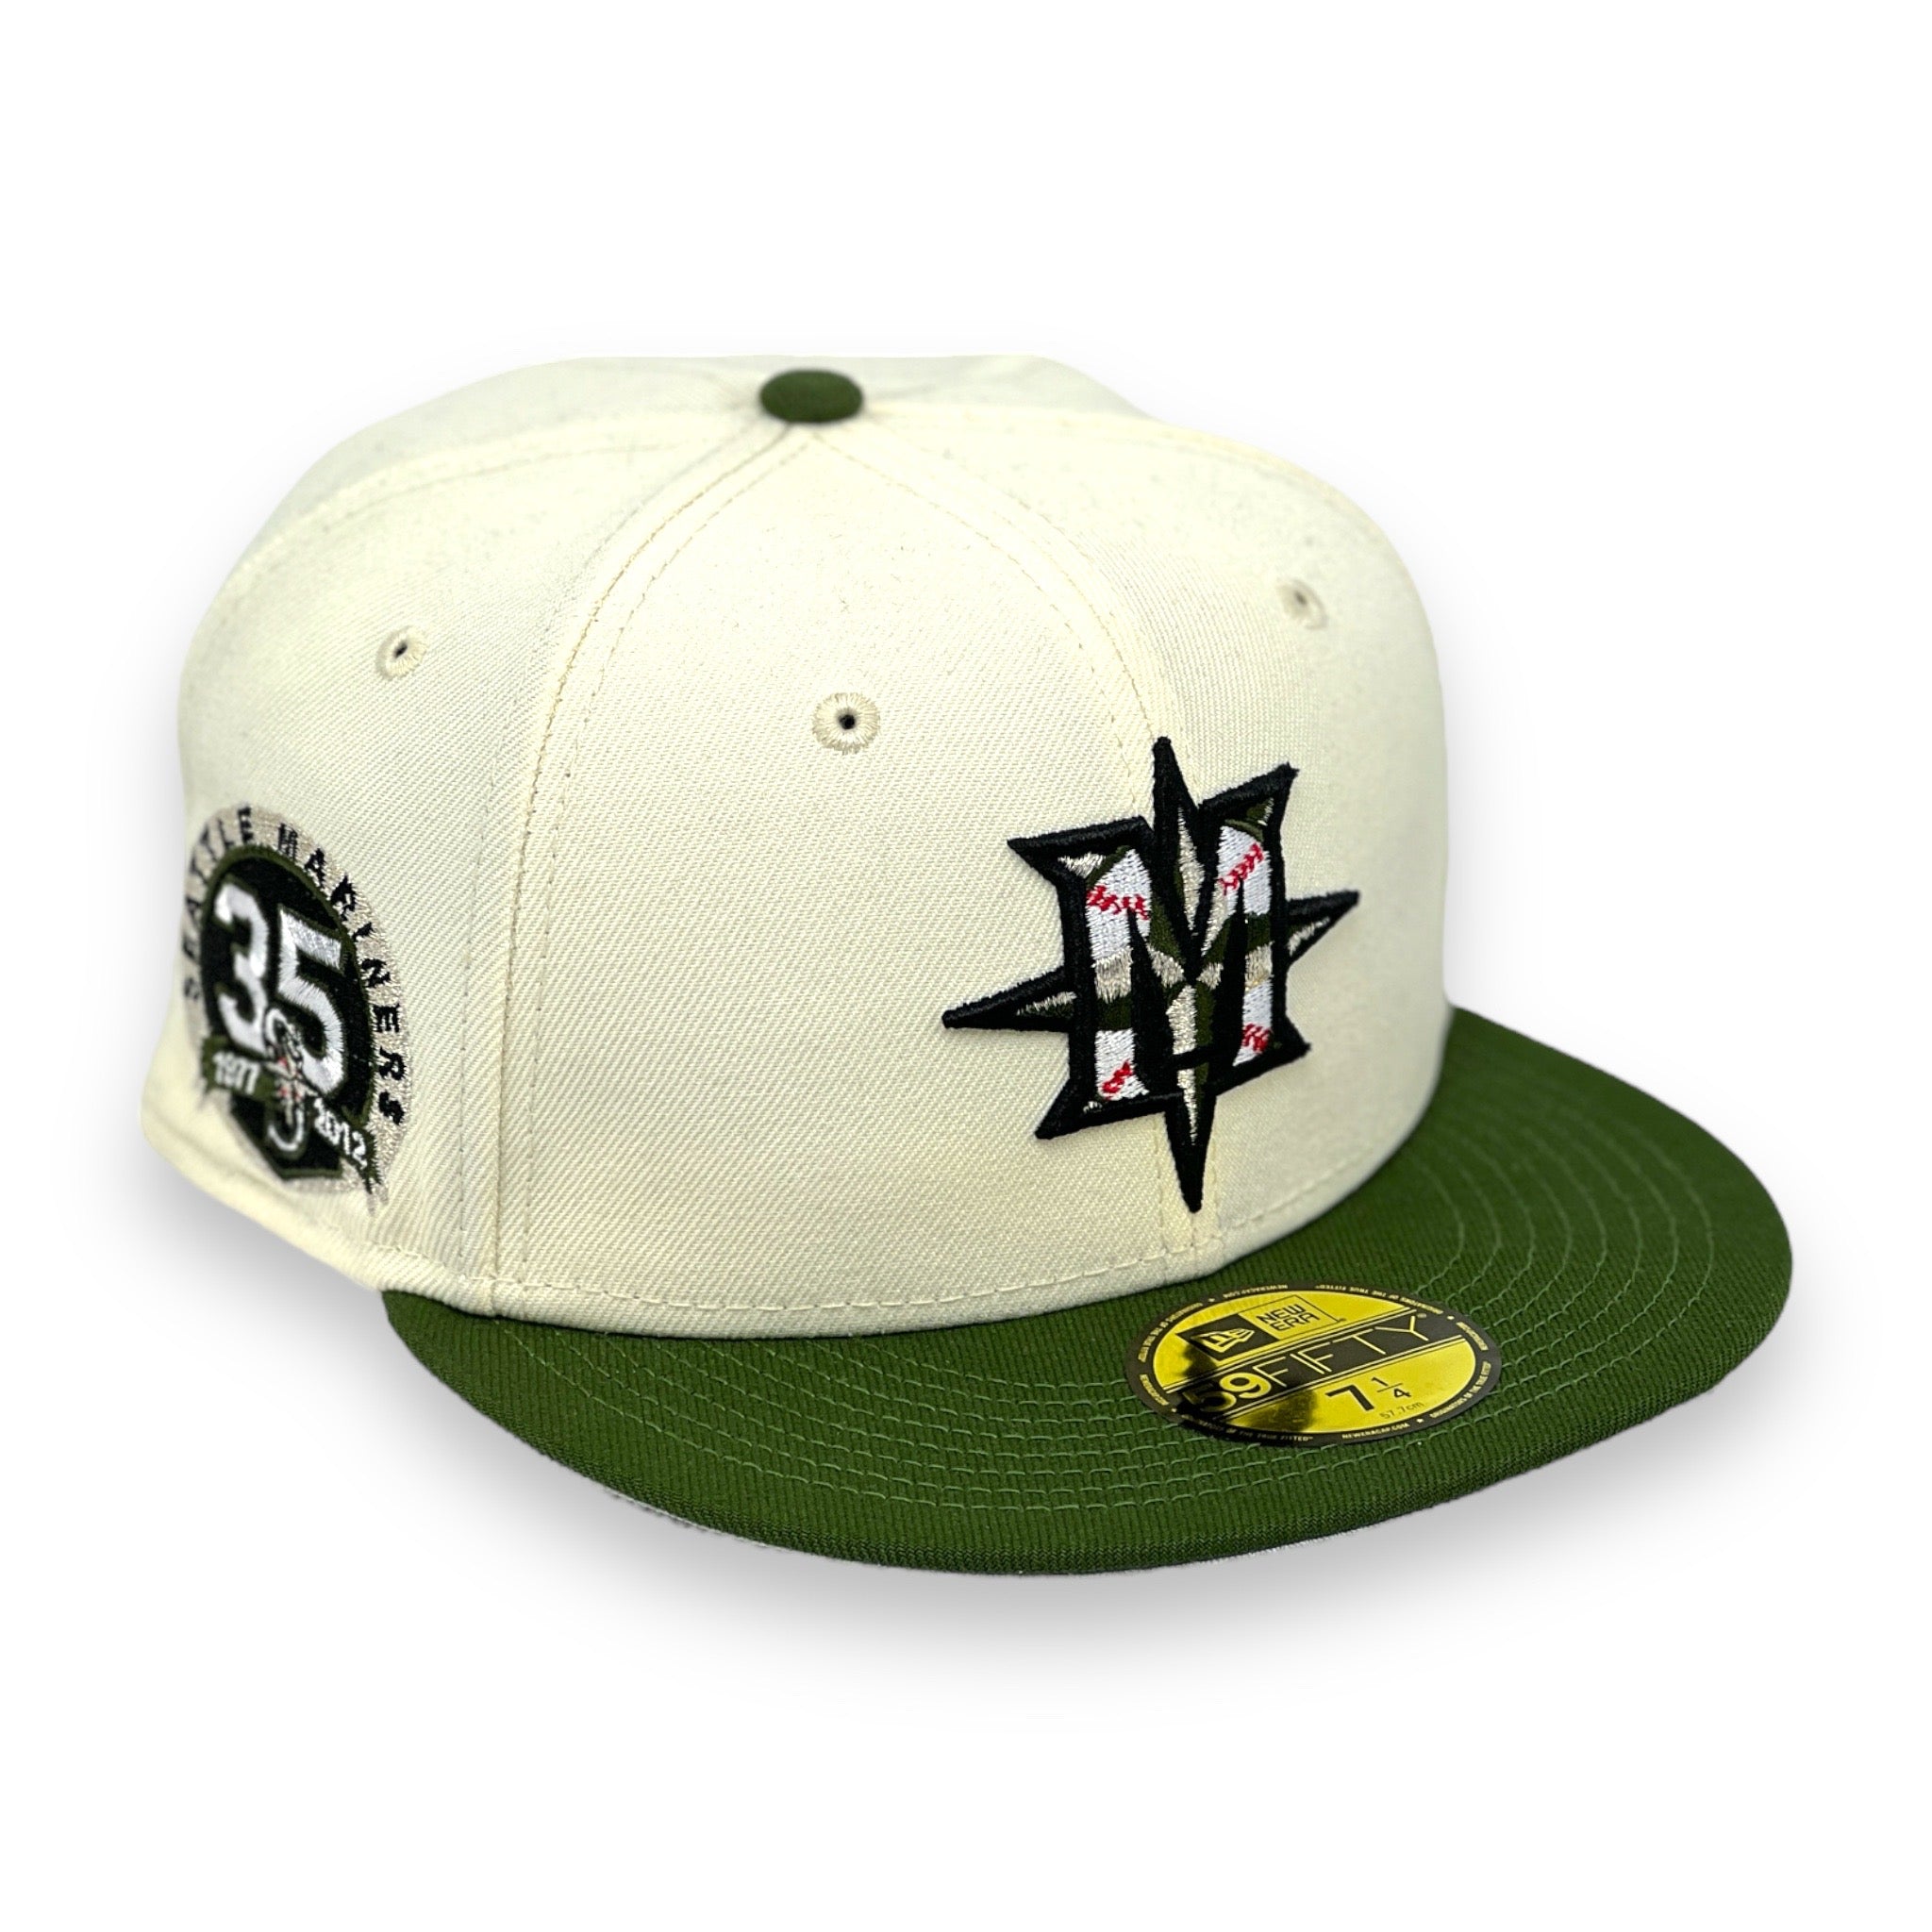 SEATTLE MARINERS (OFF-WHITE) (35TH ANN 1977-2012) NEW ERA 59FIFTY FITTED